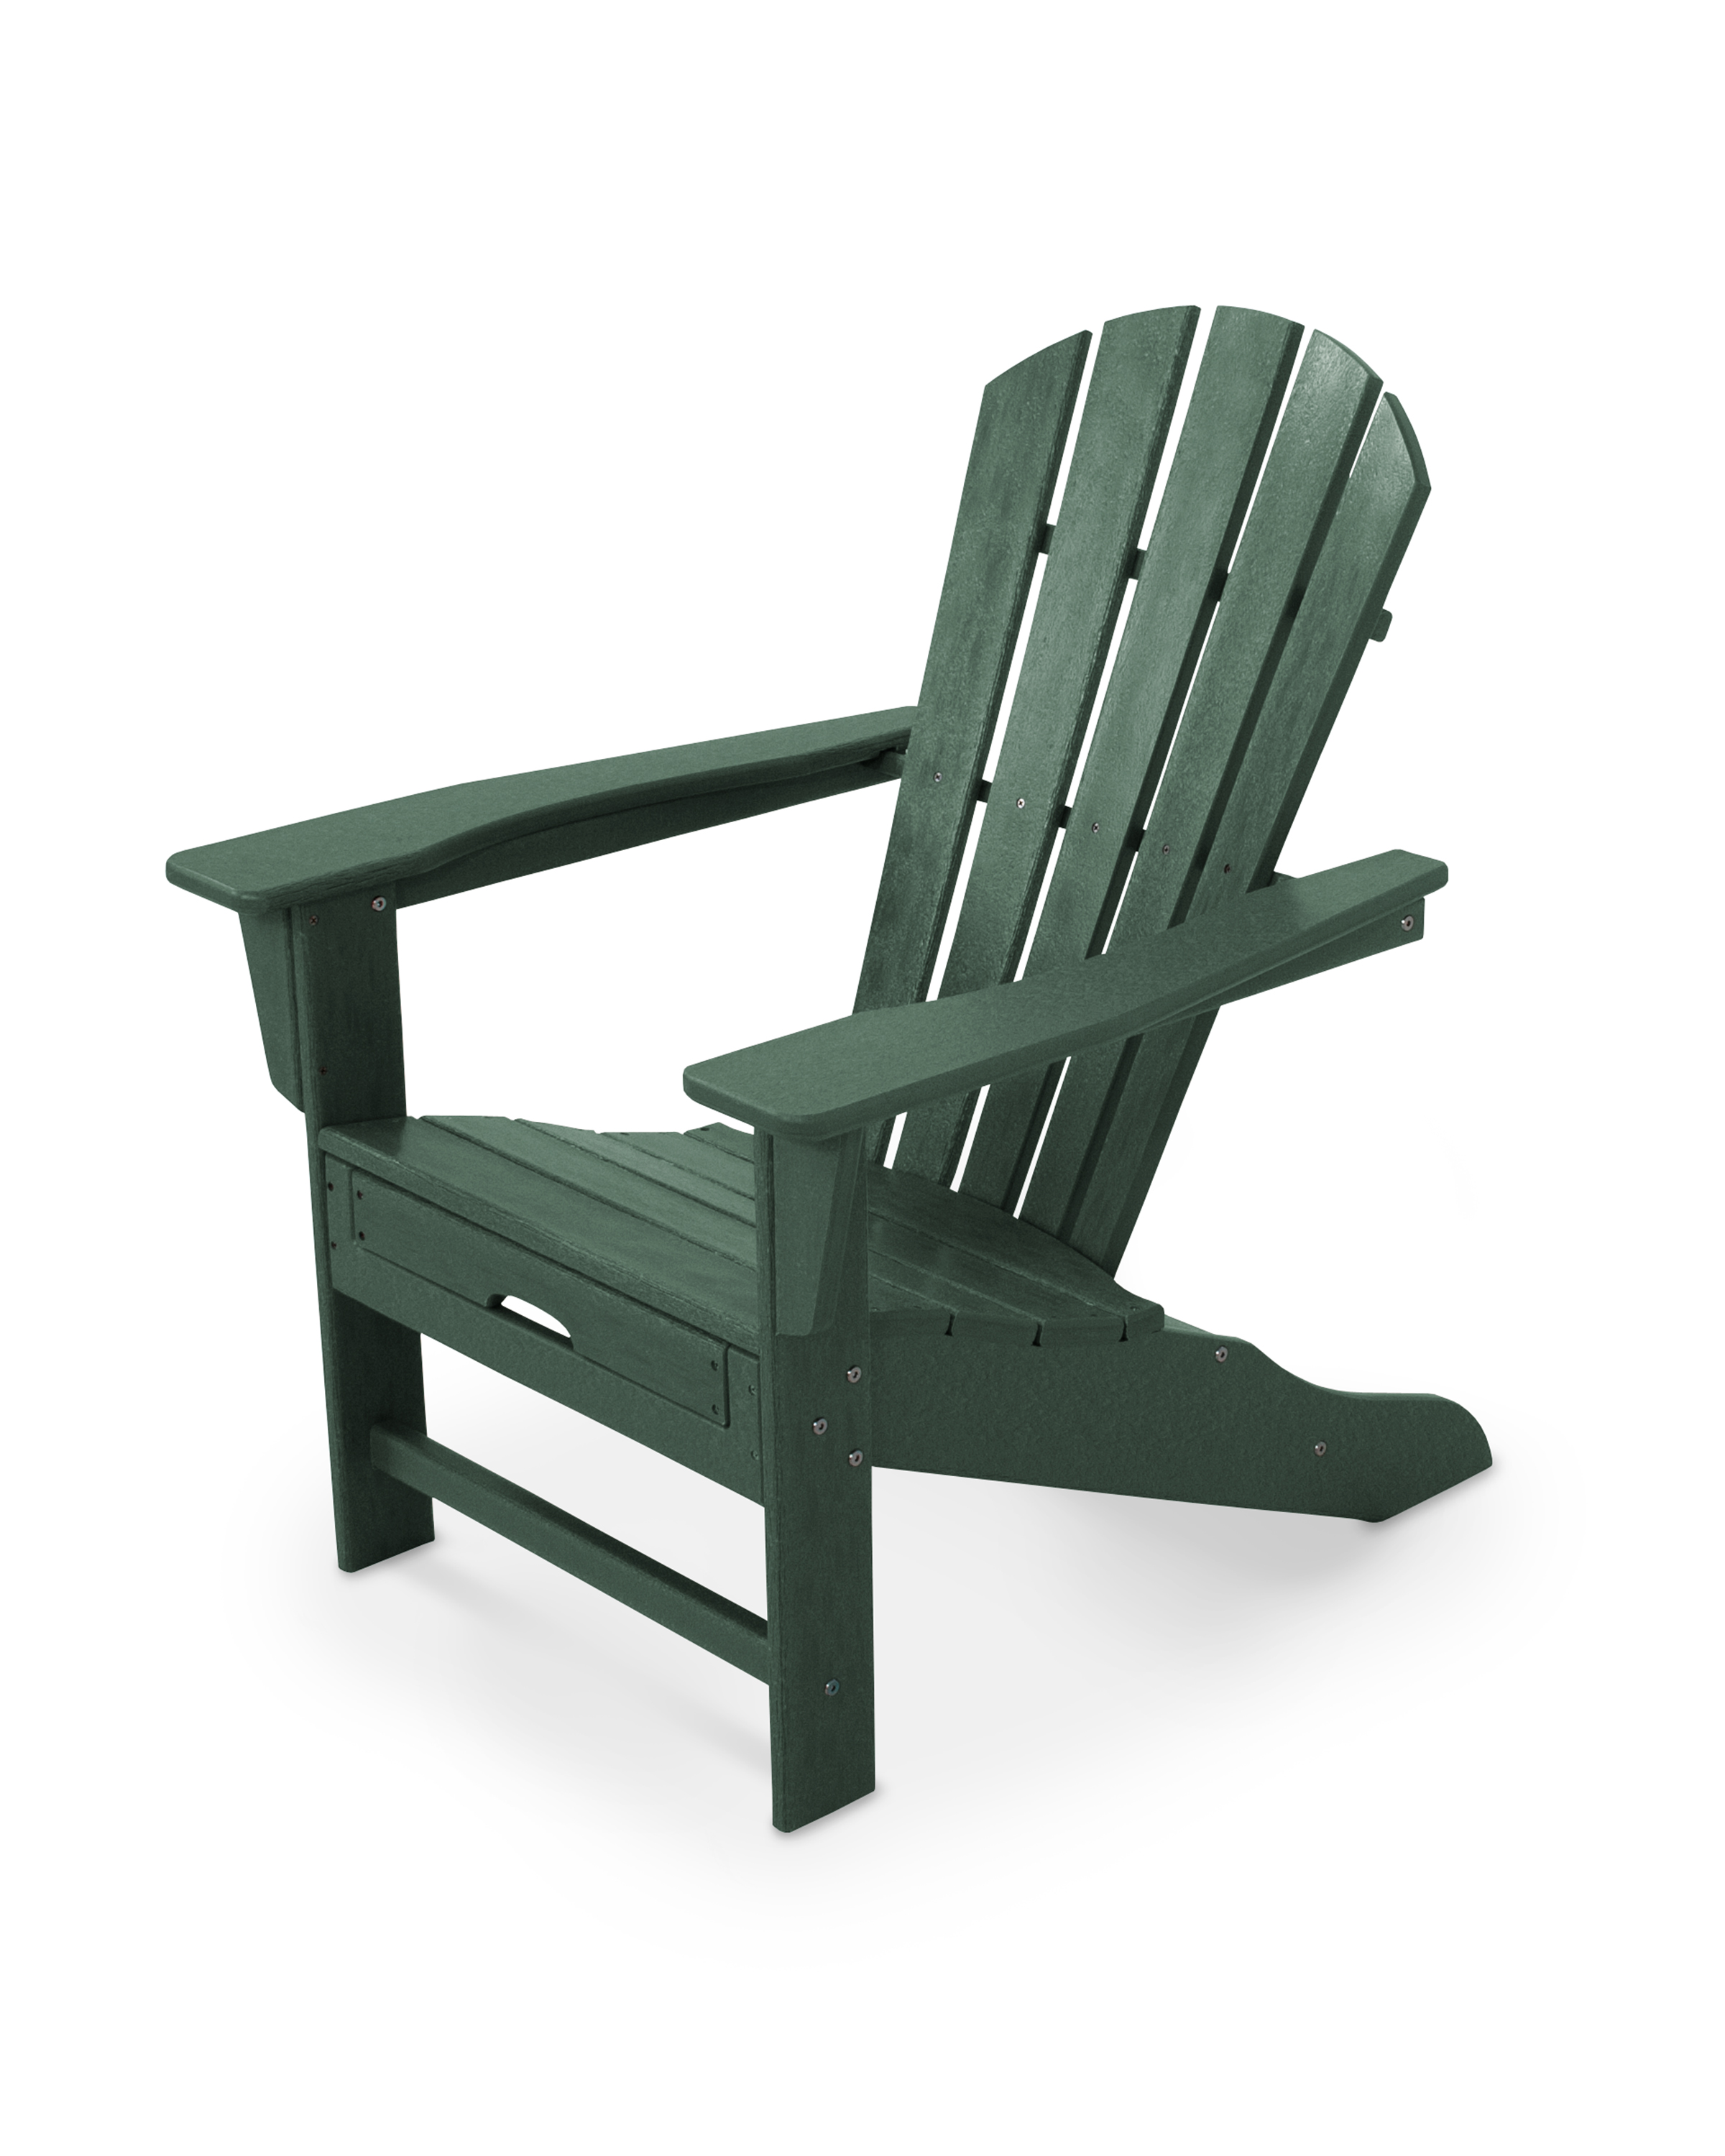 palm coast ultimate adirondack with hideaway ottoman in green thumbnail image